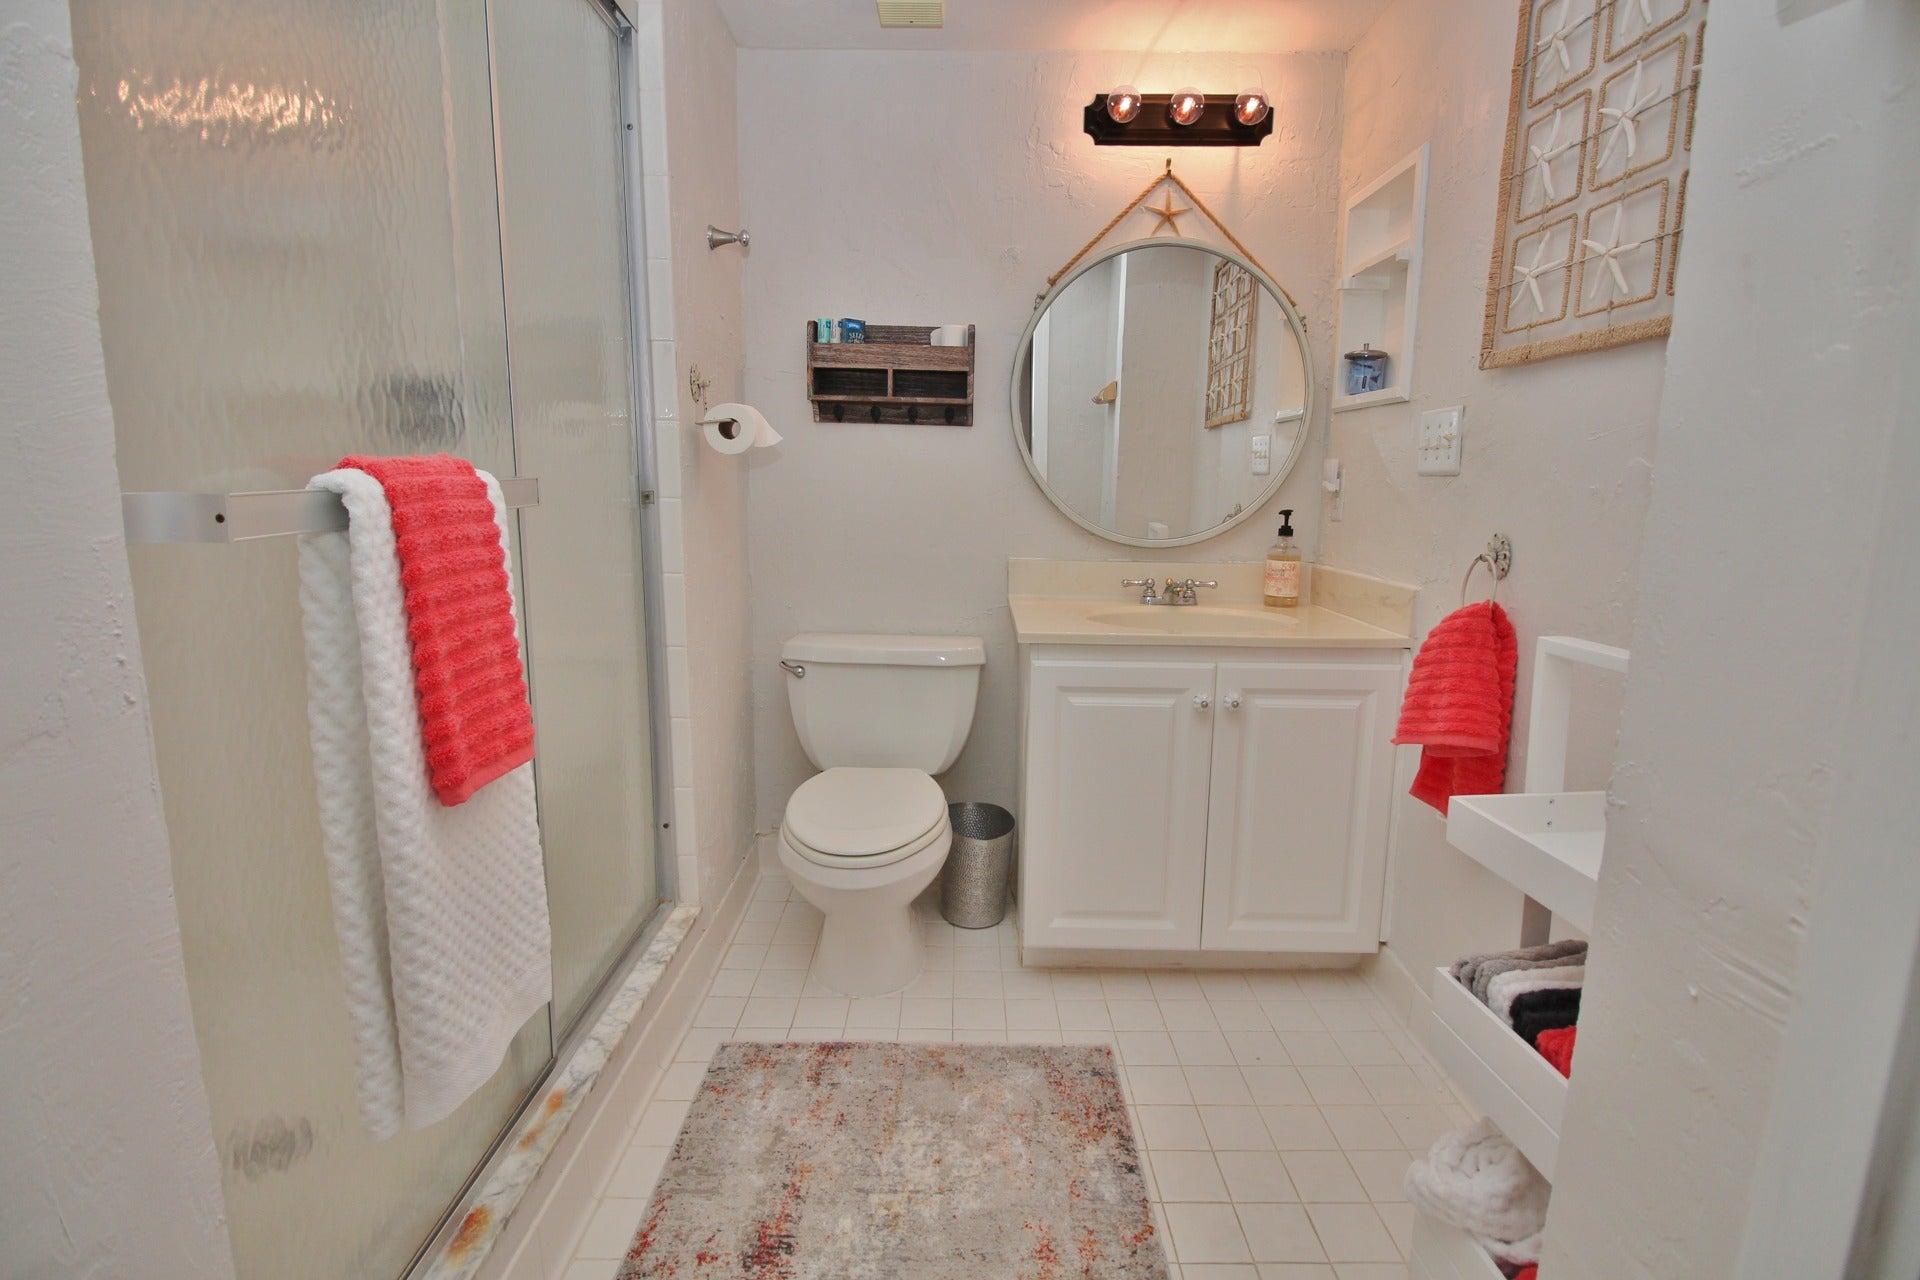 The Second Bathroom with a Walk-in Shower